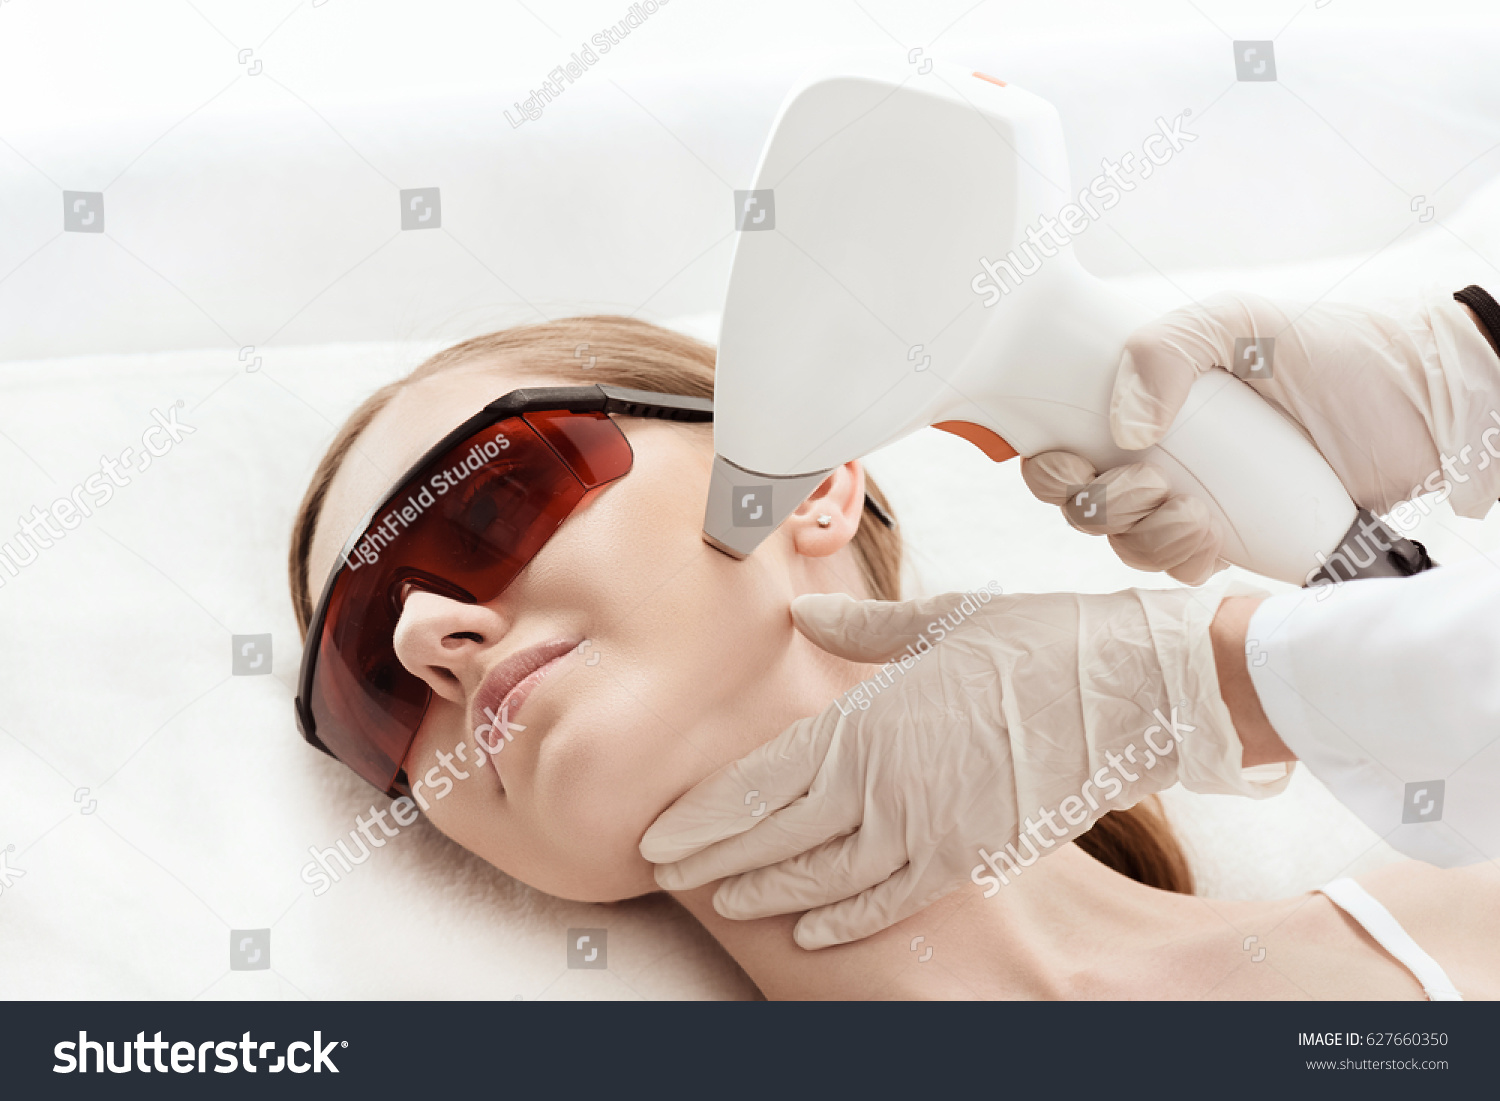 Close-up view of young woman in uv protective glasses receiving laser skin care on face #627660350